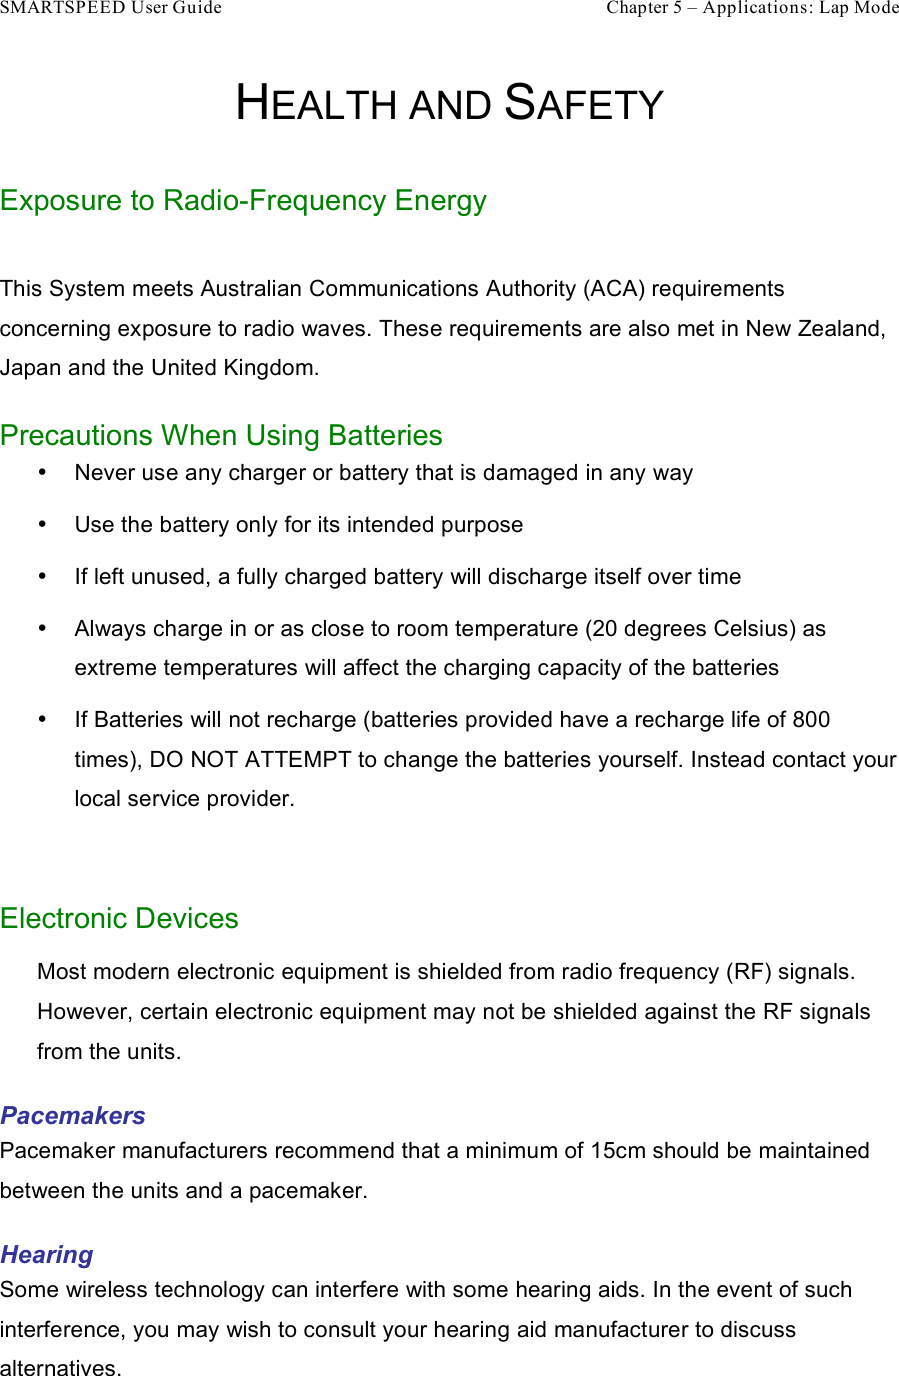 SMARTSPEED User Guide    Chapter 5 – Applications: Lap Mode HEALTH AND SAFETY Exposure to Radio-Frequency Energy  This System meets Australian Communications Authority (ACA) requirements concerning exposure to radio waves. These requirements are also met in New Zealand, Japan and the United Kingdom. Precautions When Using Batteries •  Never use any charger or battery that is damaged in any way •  Use the battery only for its intended purpose •  If left unused, a fully charged battery will discharge itself over time •  Always charge in or as close to room temperature (20 degrees Celsius) as extreme temperatures will affect the charging capacity of the batteries •  If Batteries will not recharge (batteries provided have a recharge life of 800 times), DO NOT ATTEMPT to change the batteries yourself. Instead contact your local service provider.  Electronic Devices Most modern electronic equipment is shielded from radio frequency (RF) signals. However, certain electronic equipment may not be shielded against the RF signals from the units.  Pacemakers Pacemaker manufacturers recommend that a minimum of 15cm should be maintained between the units and a pacemaker.  Hearing Some wireless technology can interfere with some hearing aids. In the event of such interference, you may wish to consult your hearing aid manufacturer to discuss alternatives. 